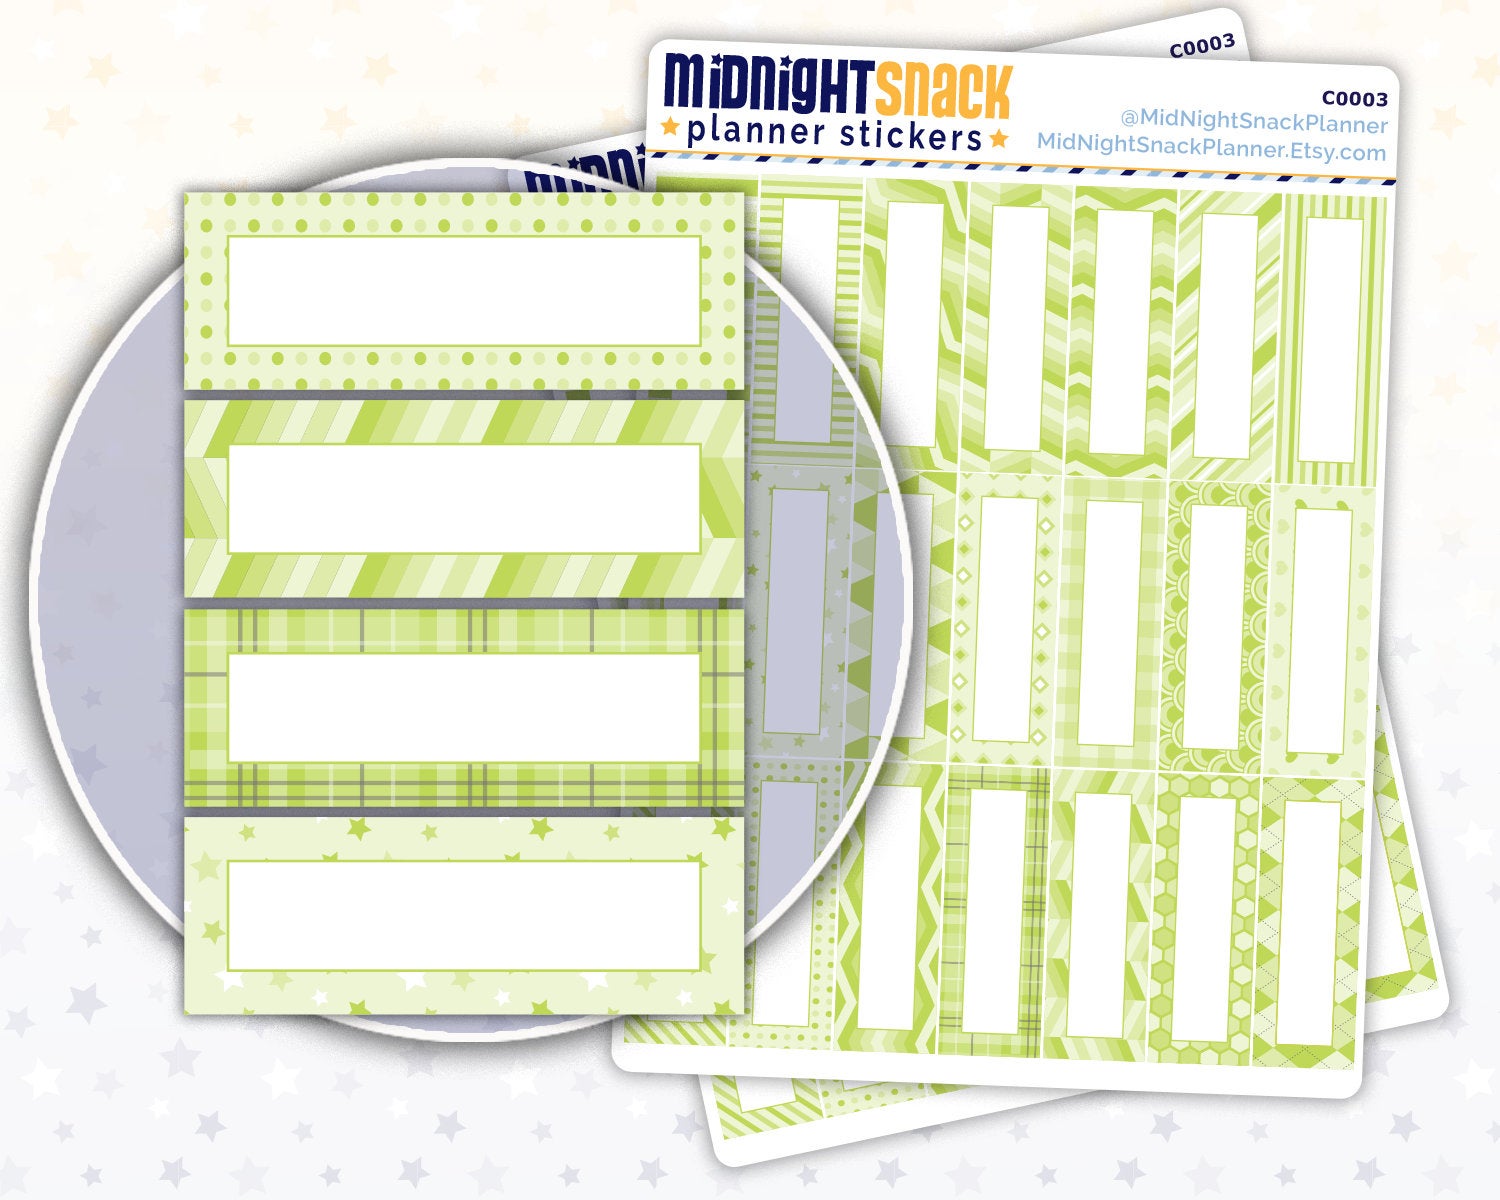 Green Patterned Quarter Boxes Planner Sticker from Midnight Snack Planner